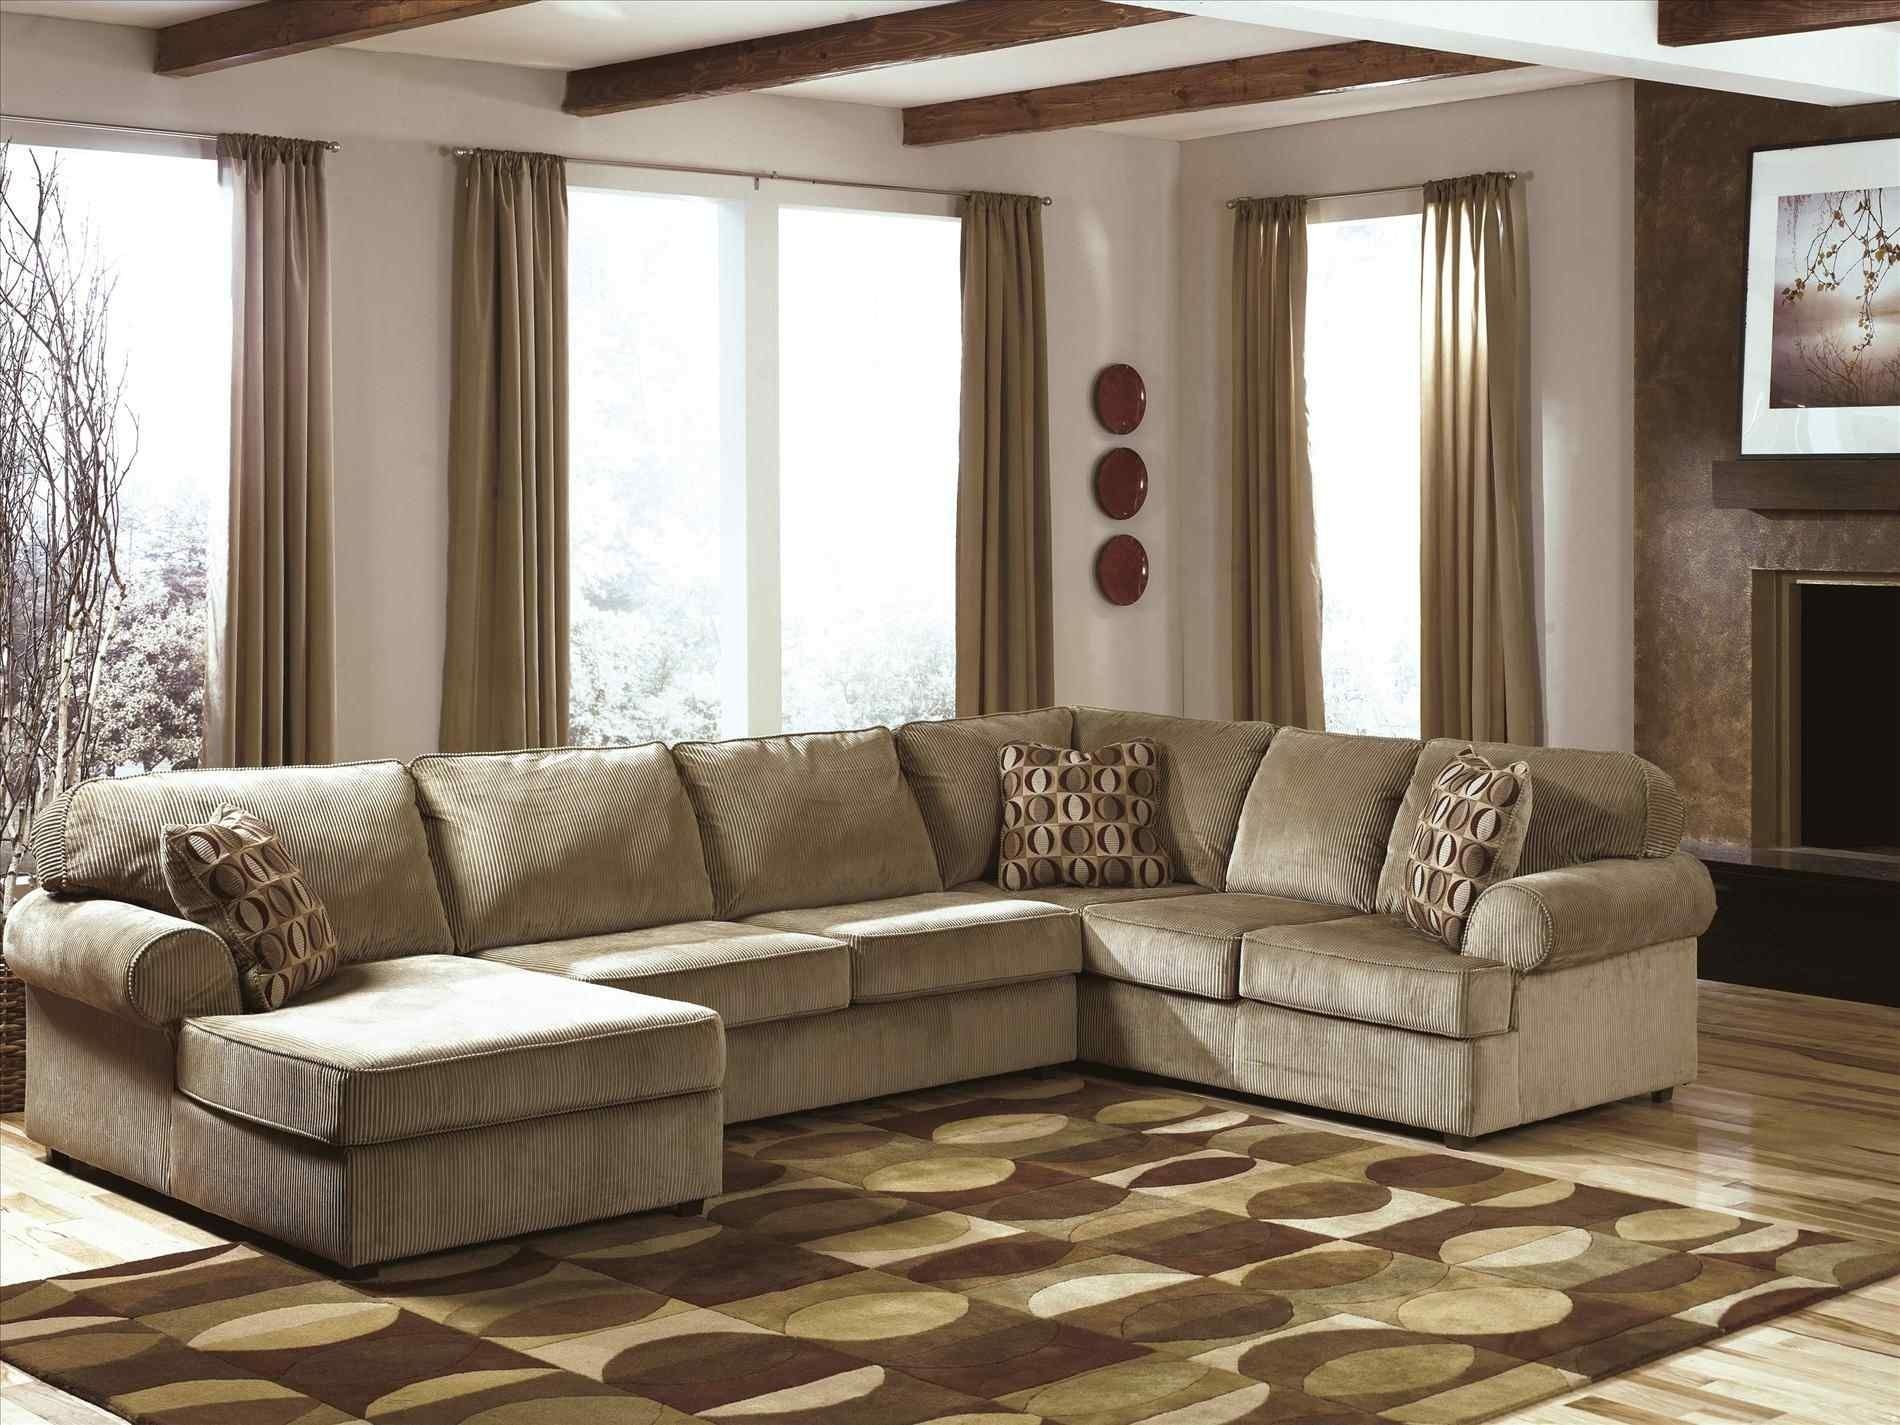 Sectional Sofas Cheap Tufted Ottoman Used Furniture Ottawa For Sale Throughout Ottawa Sectional Sofas (View 8 of 10)